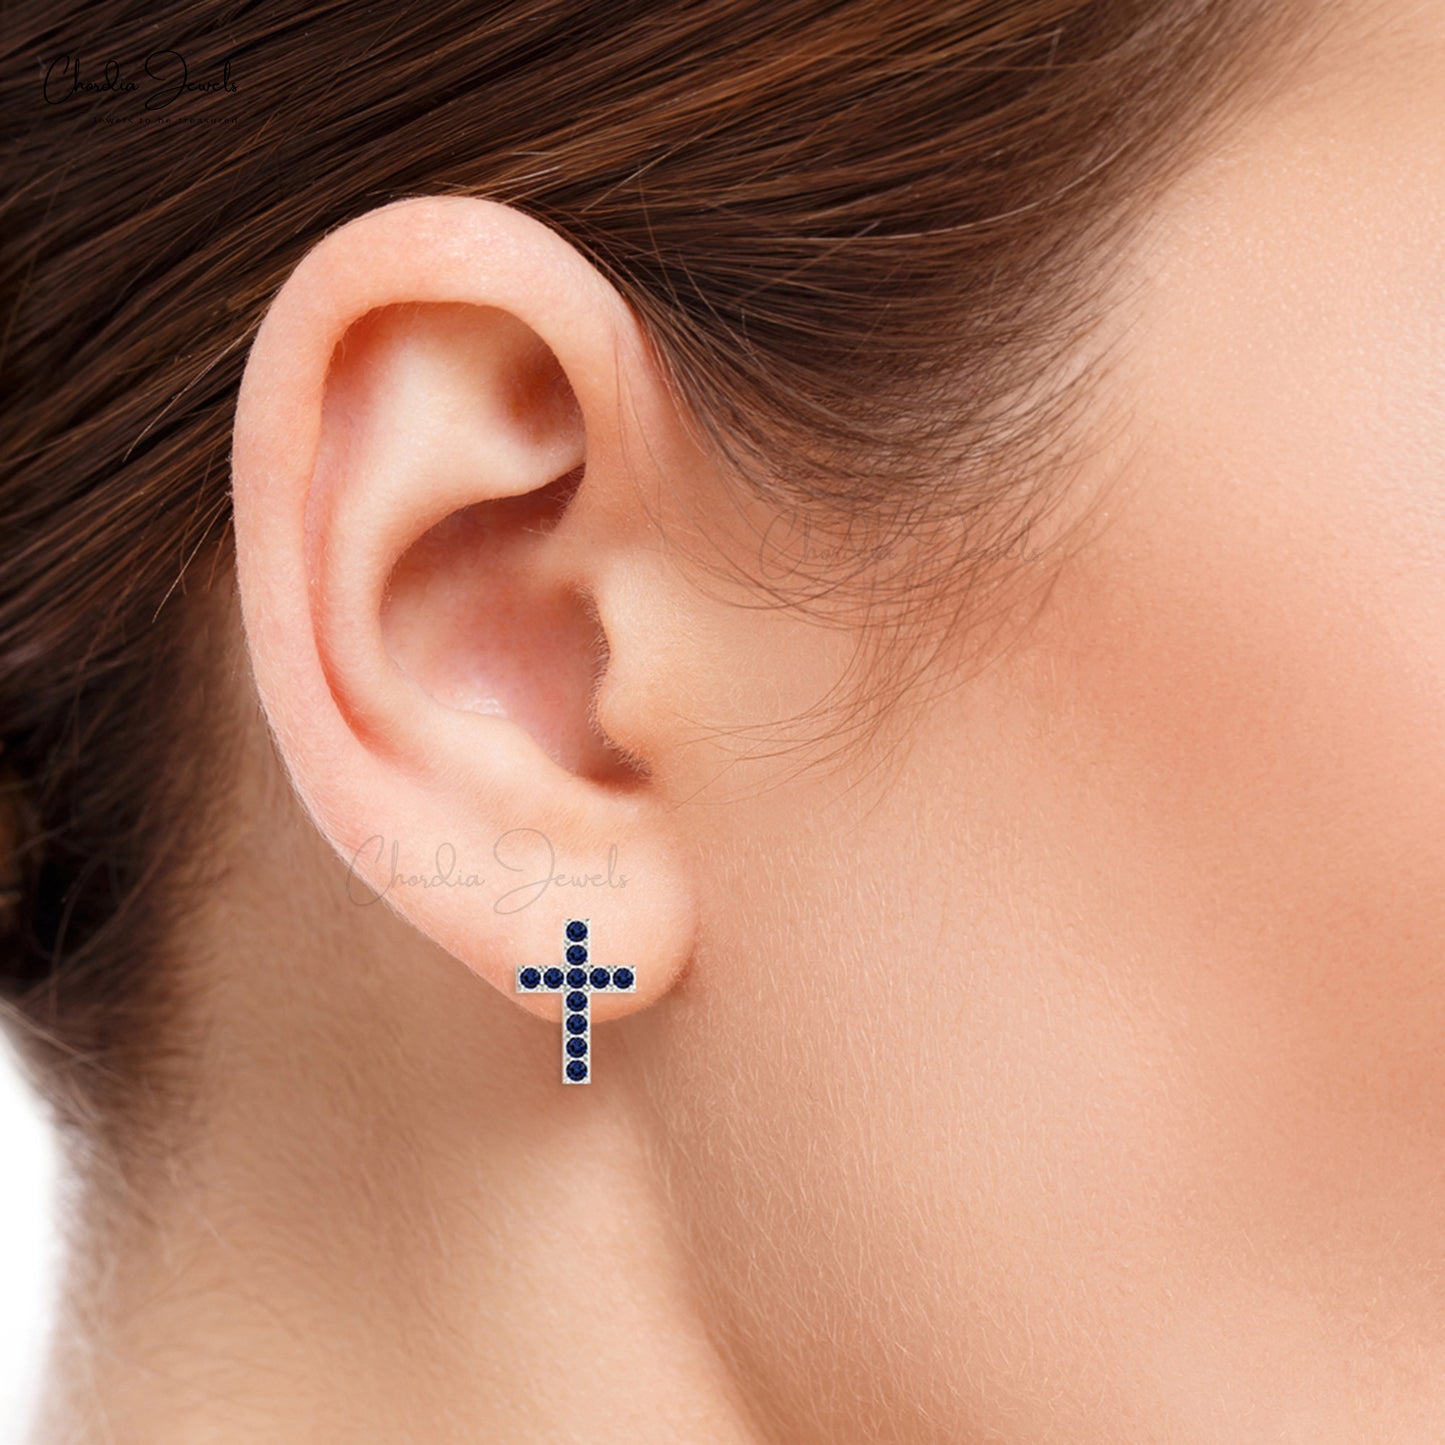 Cross Jewelry Earring Fashion Women Real 14k Gold Earring Set Natural Blue Sapphire Gemstone Religious Stud Earrings Anniversary Gift For Wife